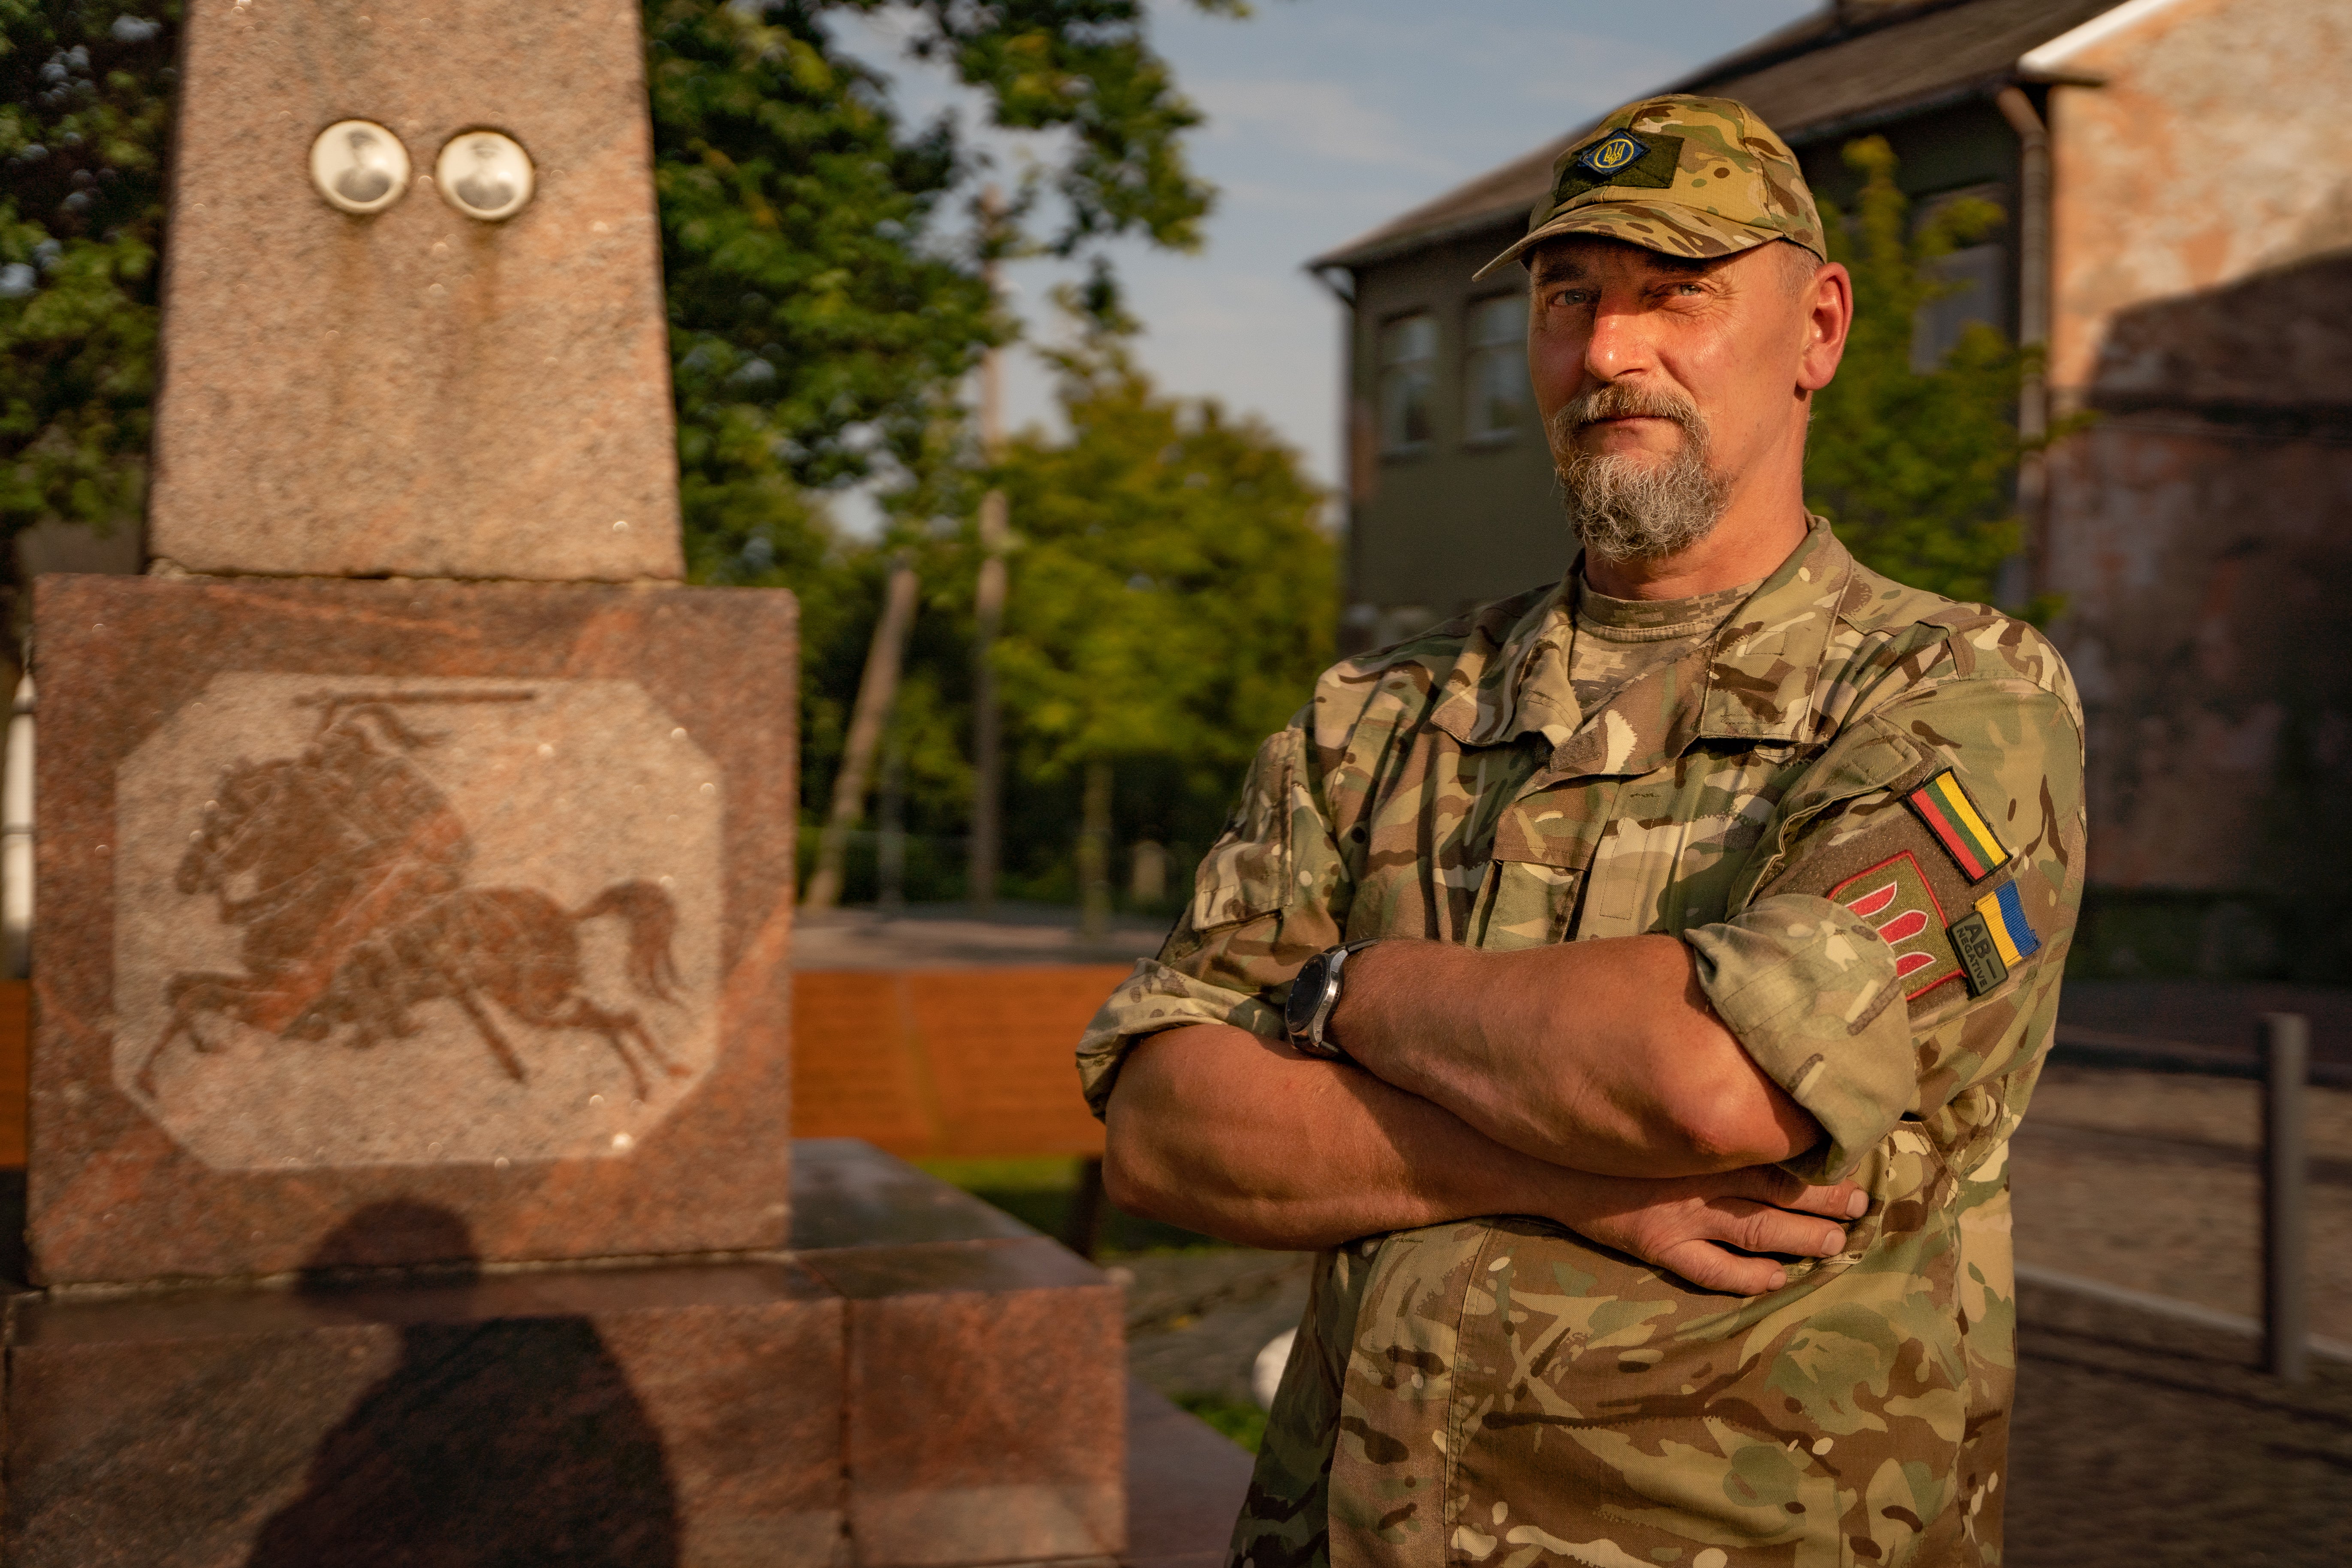 Mindaugas Lietuvninkas joined the Ukrainian foreign legion to fight Russia’s forces after defending the Suwalki gap in Lithuania, nicknamed Nato’s weakest point